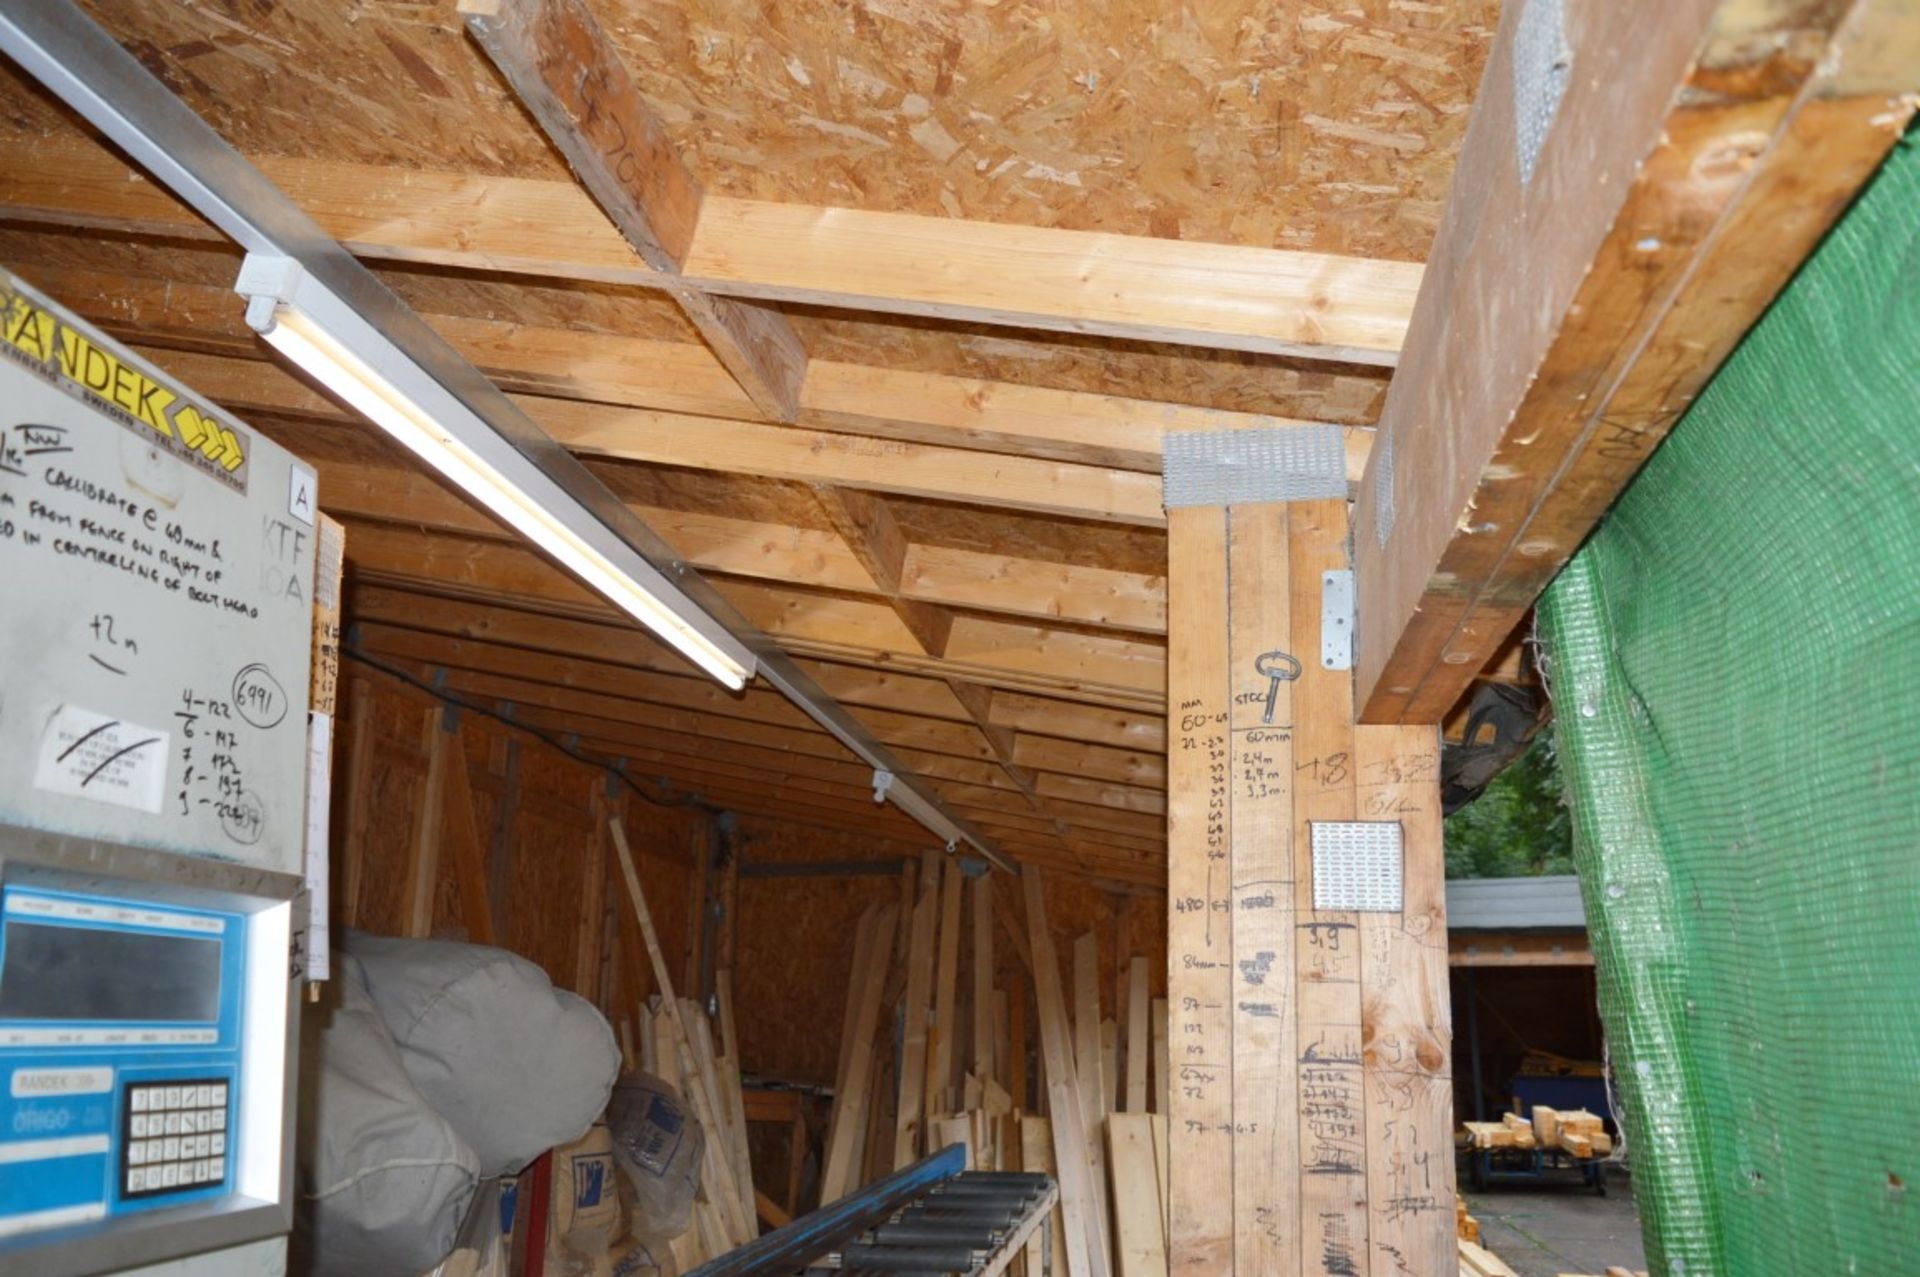 1 x Large Purpose Built Canopy Shed - Super Chord Purlin Construction With OSB Felted Roof - buyer - Image 7 of 7